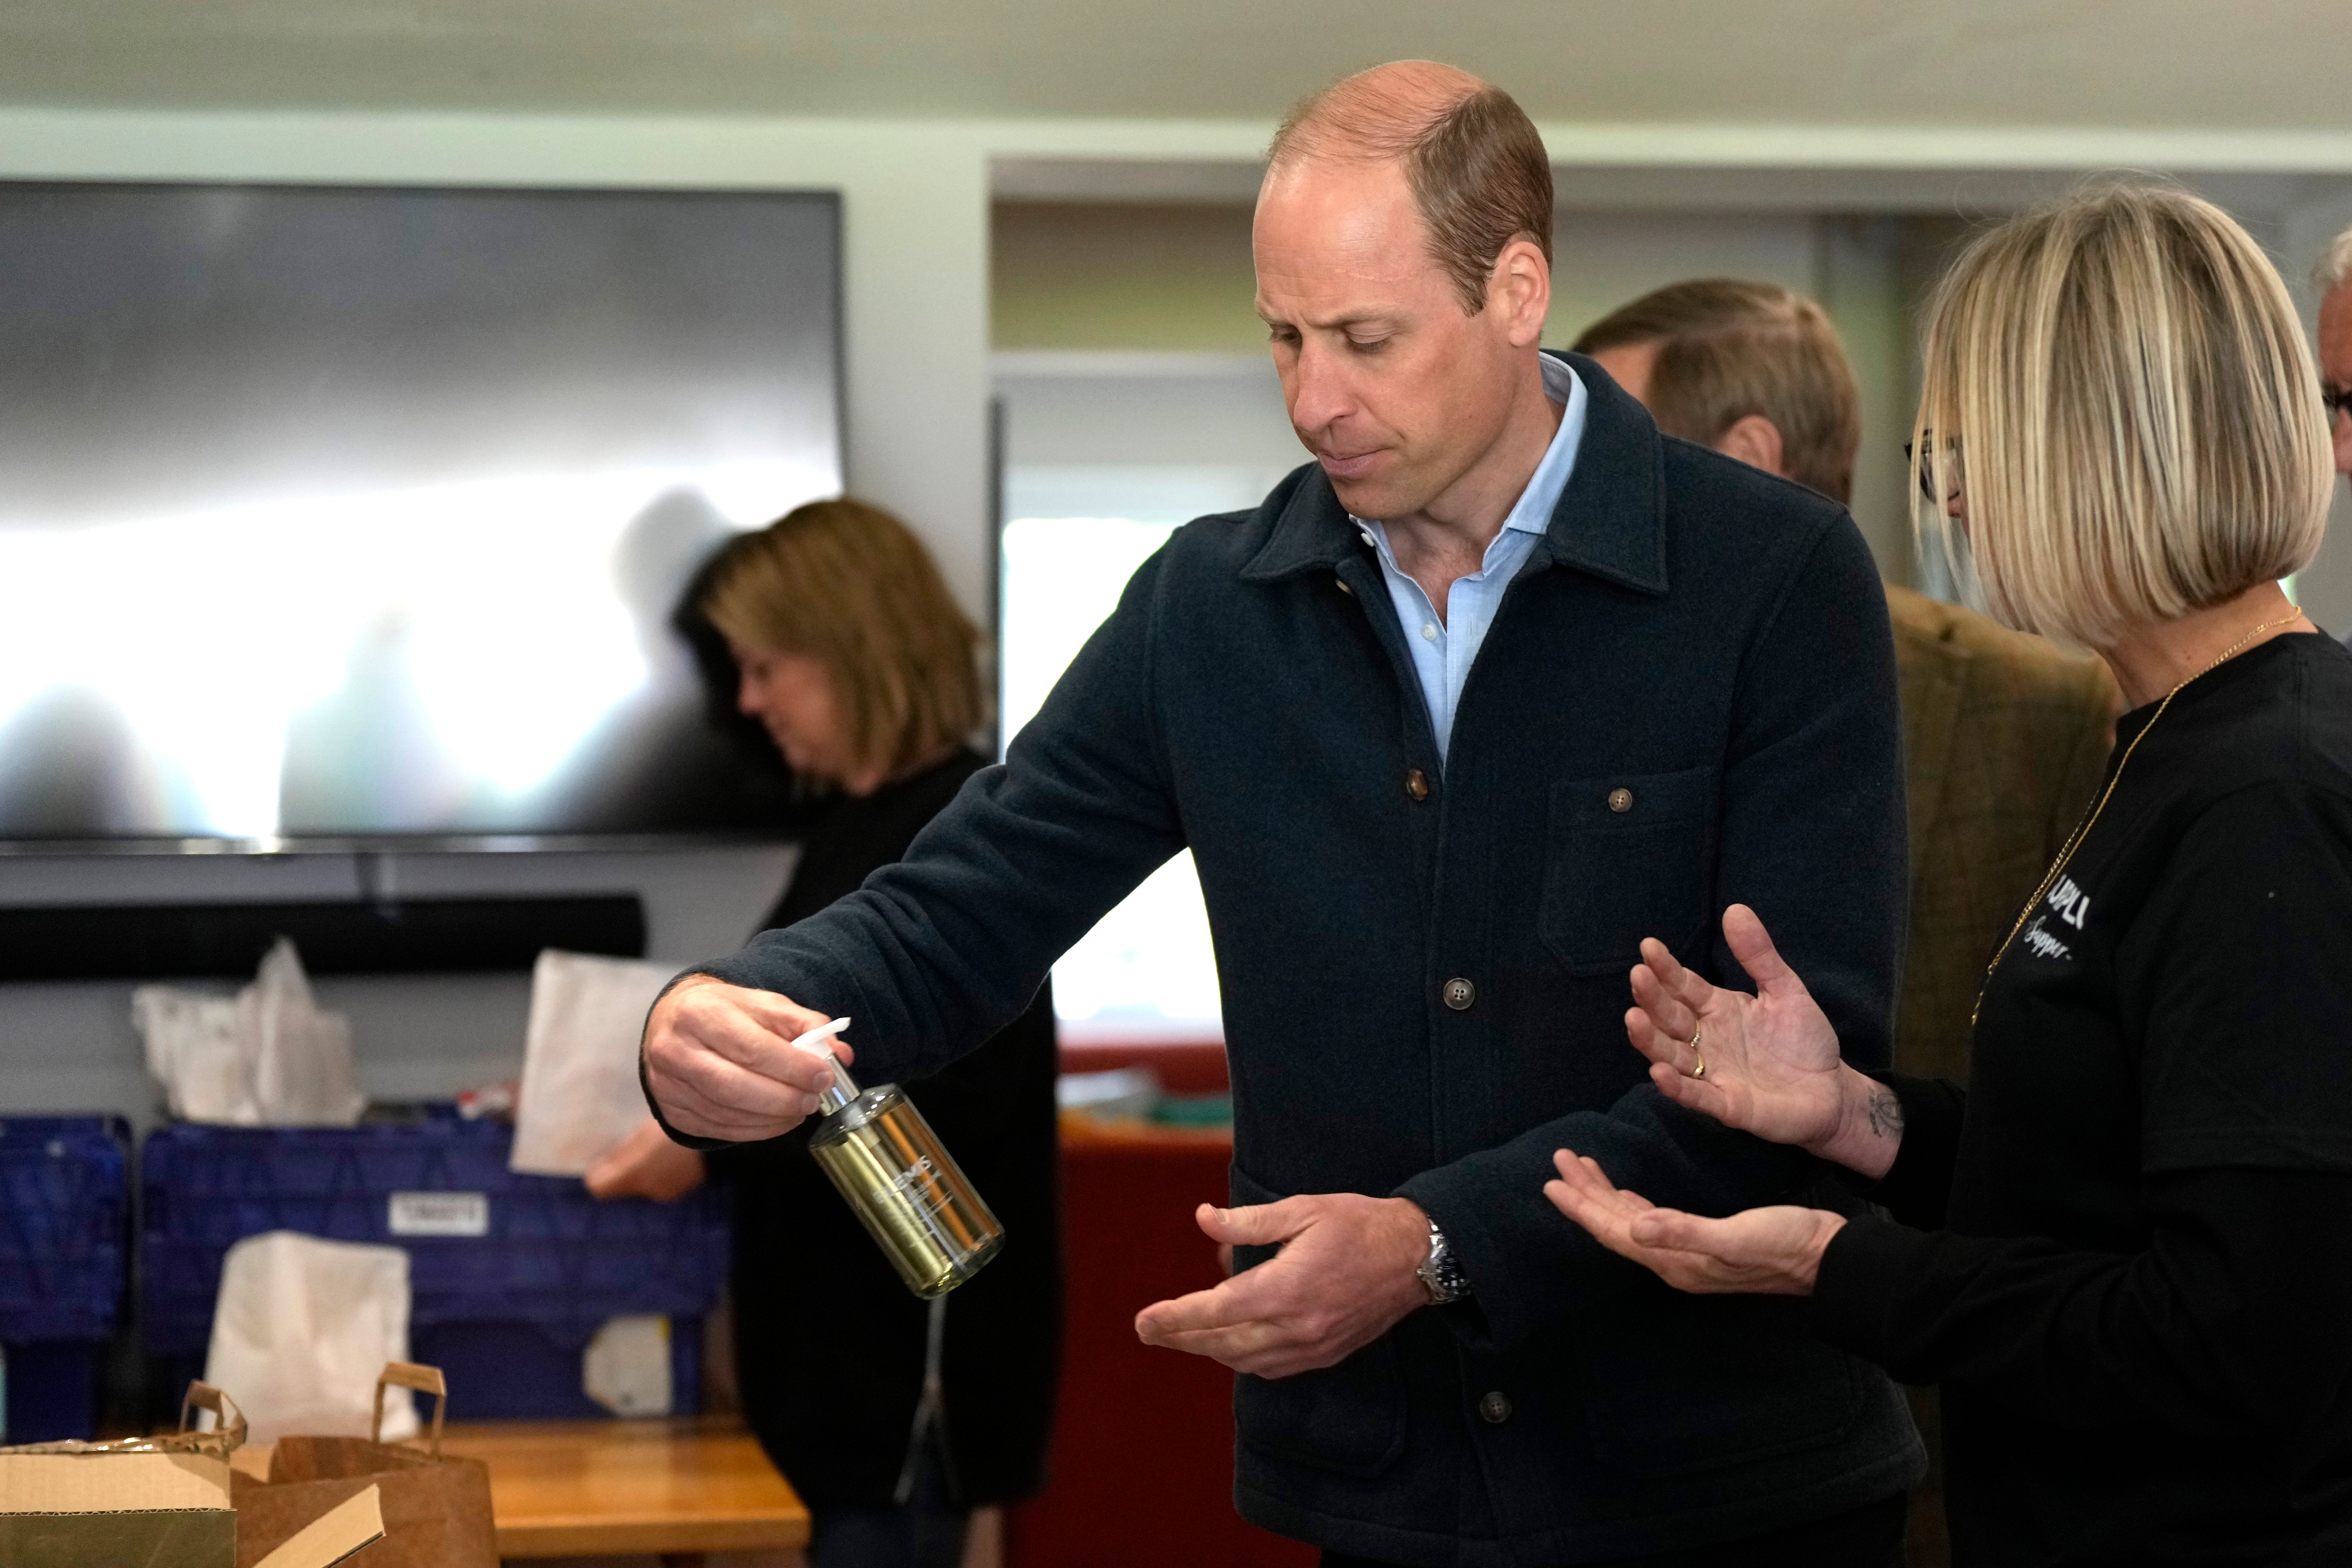 Prince William helped volunteers during today’s engagement